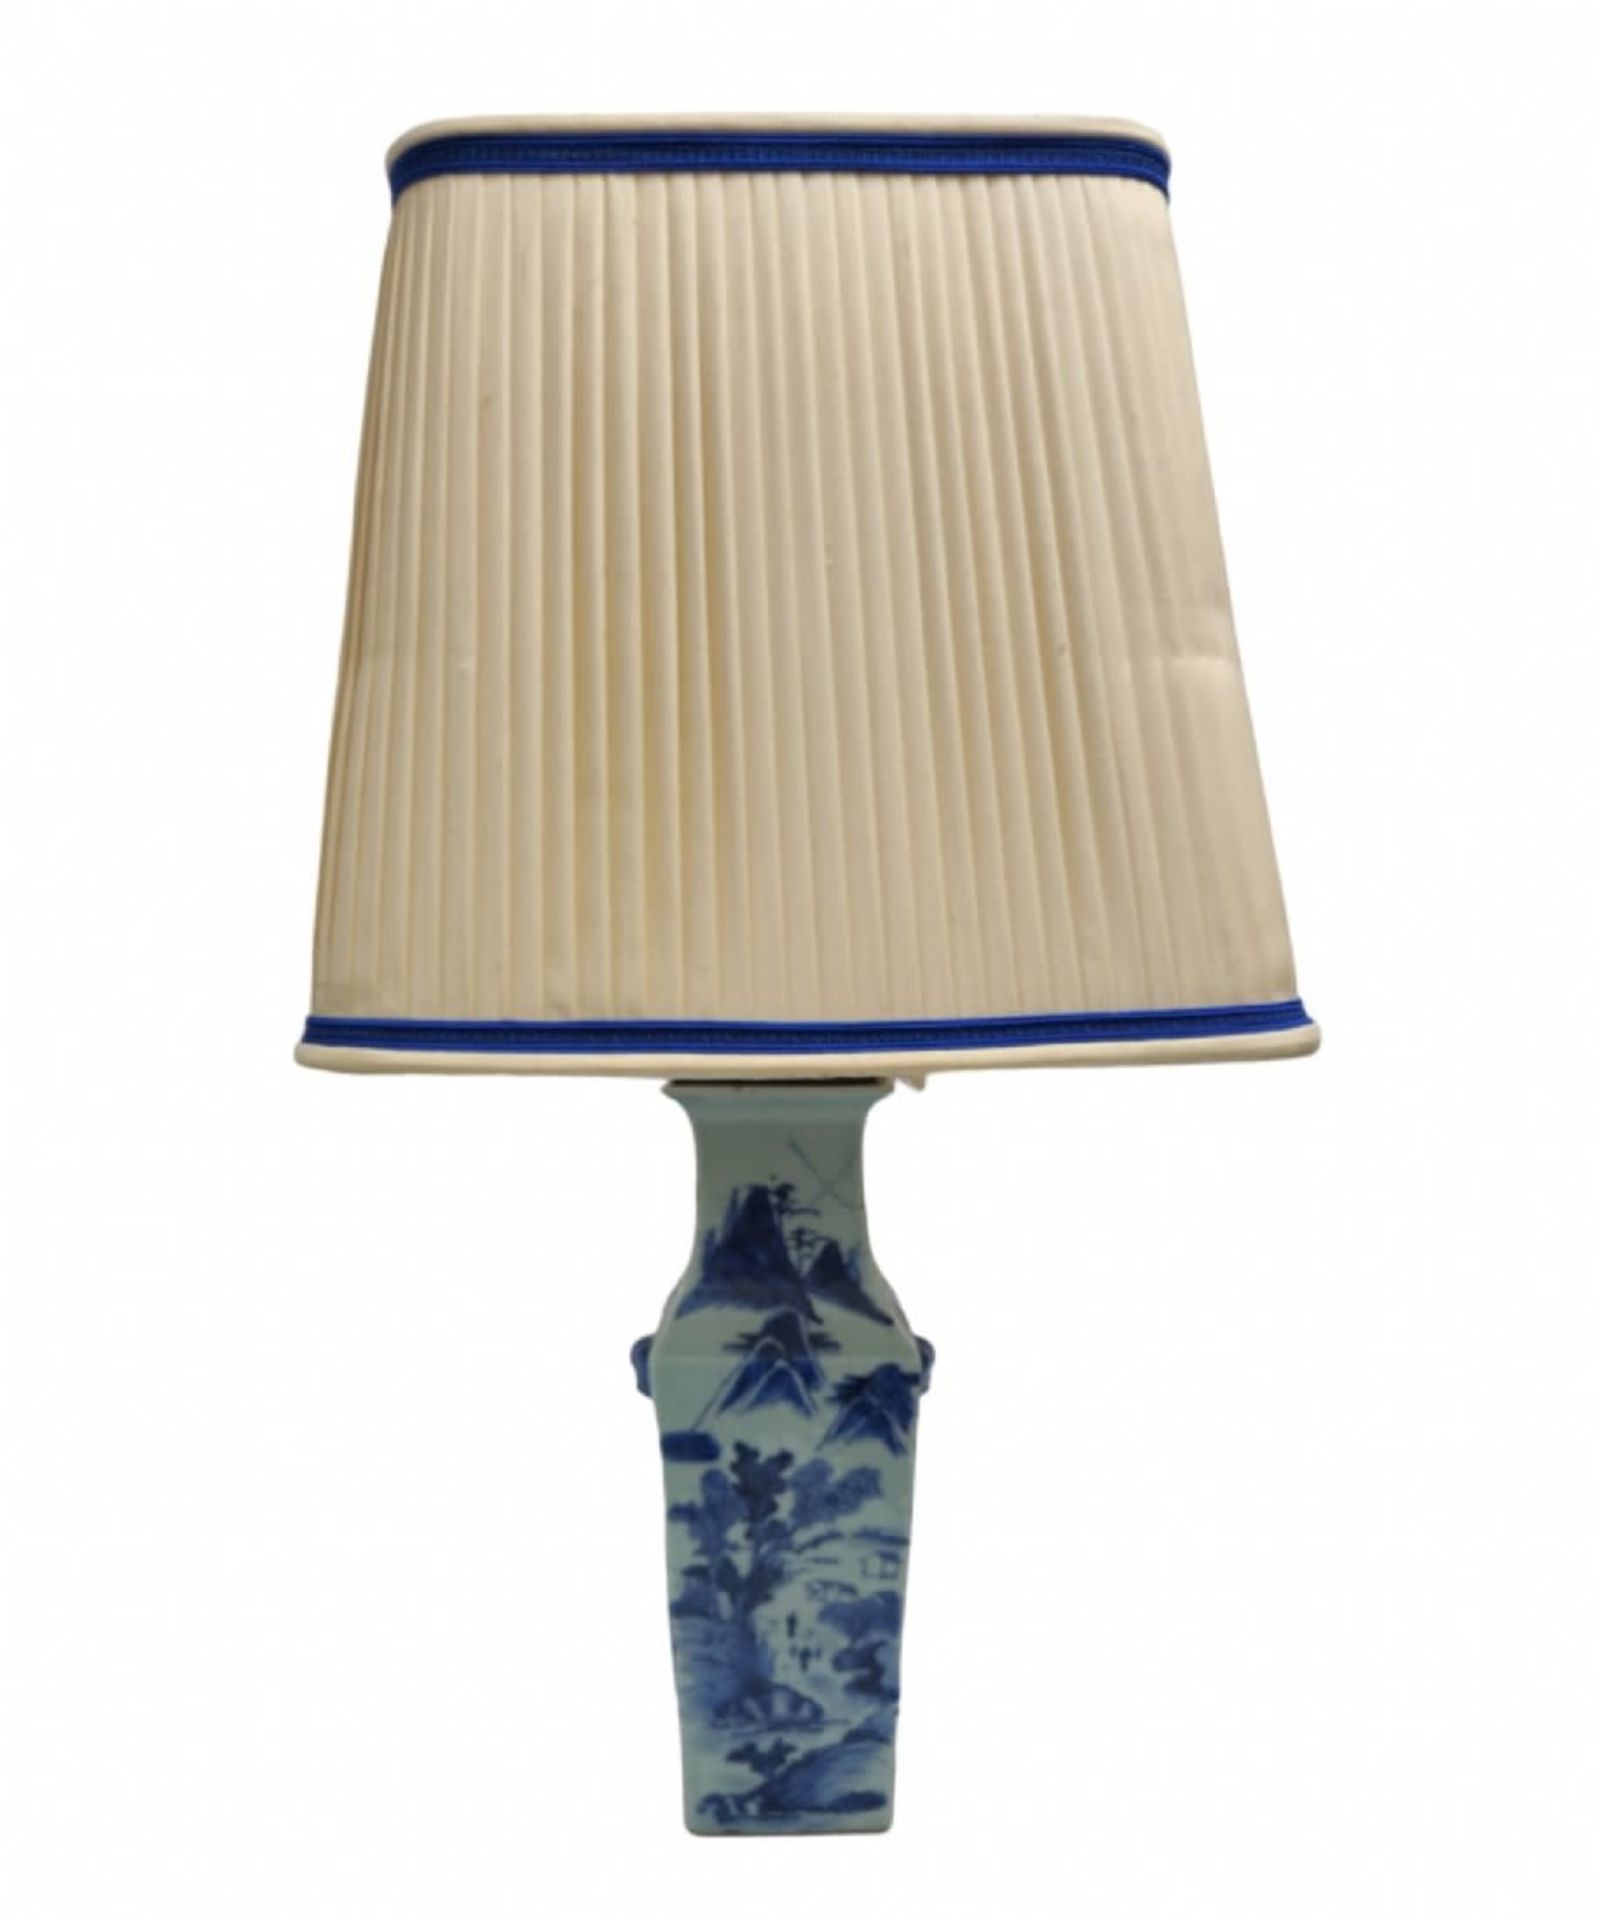 Chinese base (leg) for a table lamp, a square blue and white porcelain jug, wooden base and